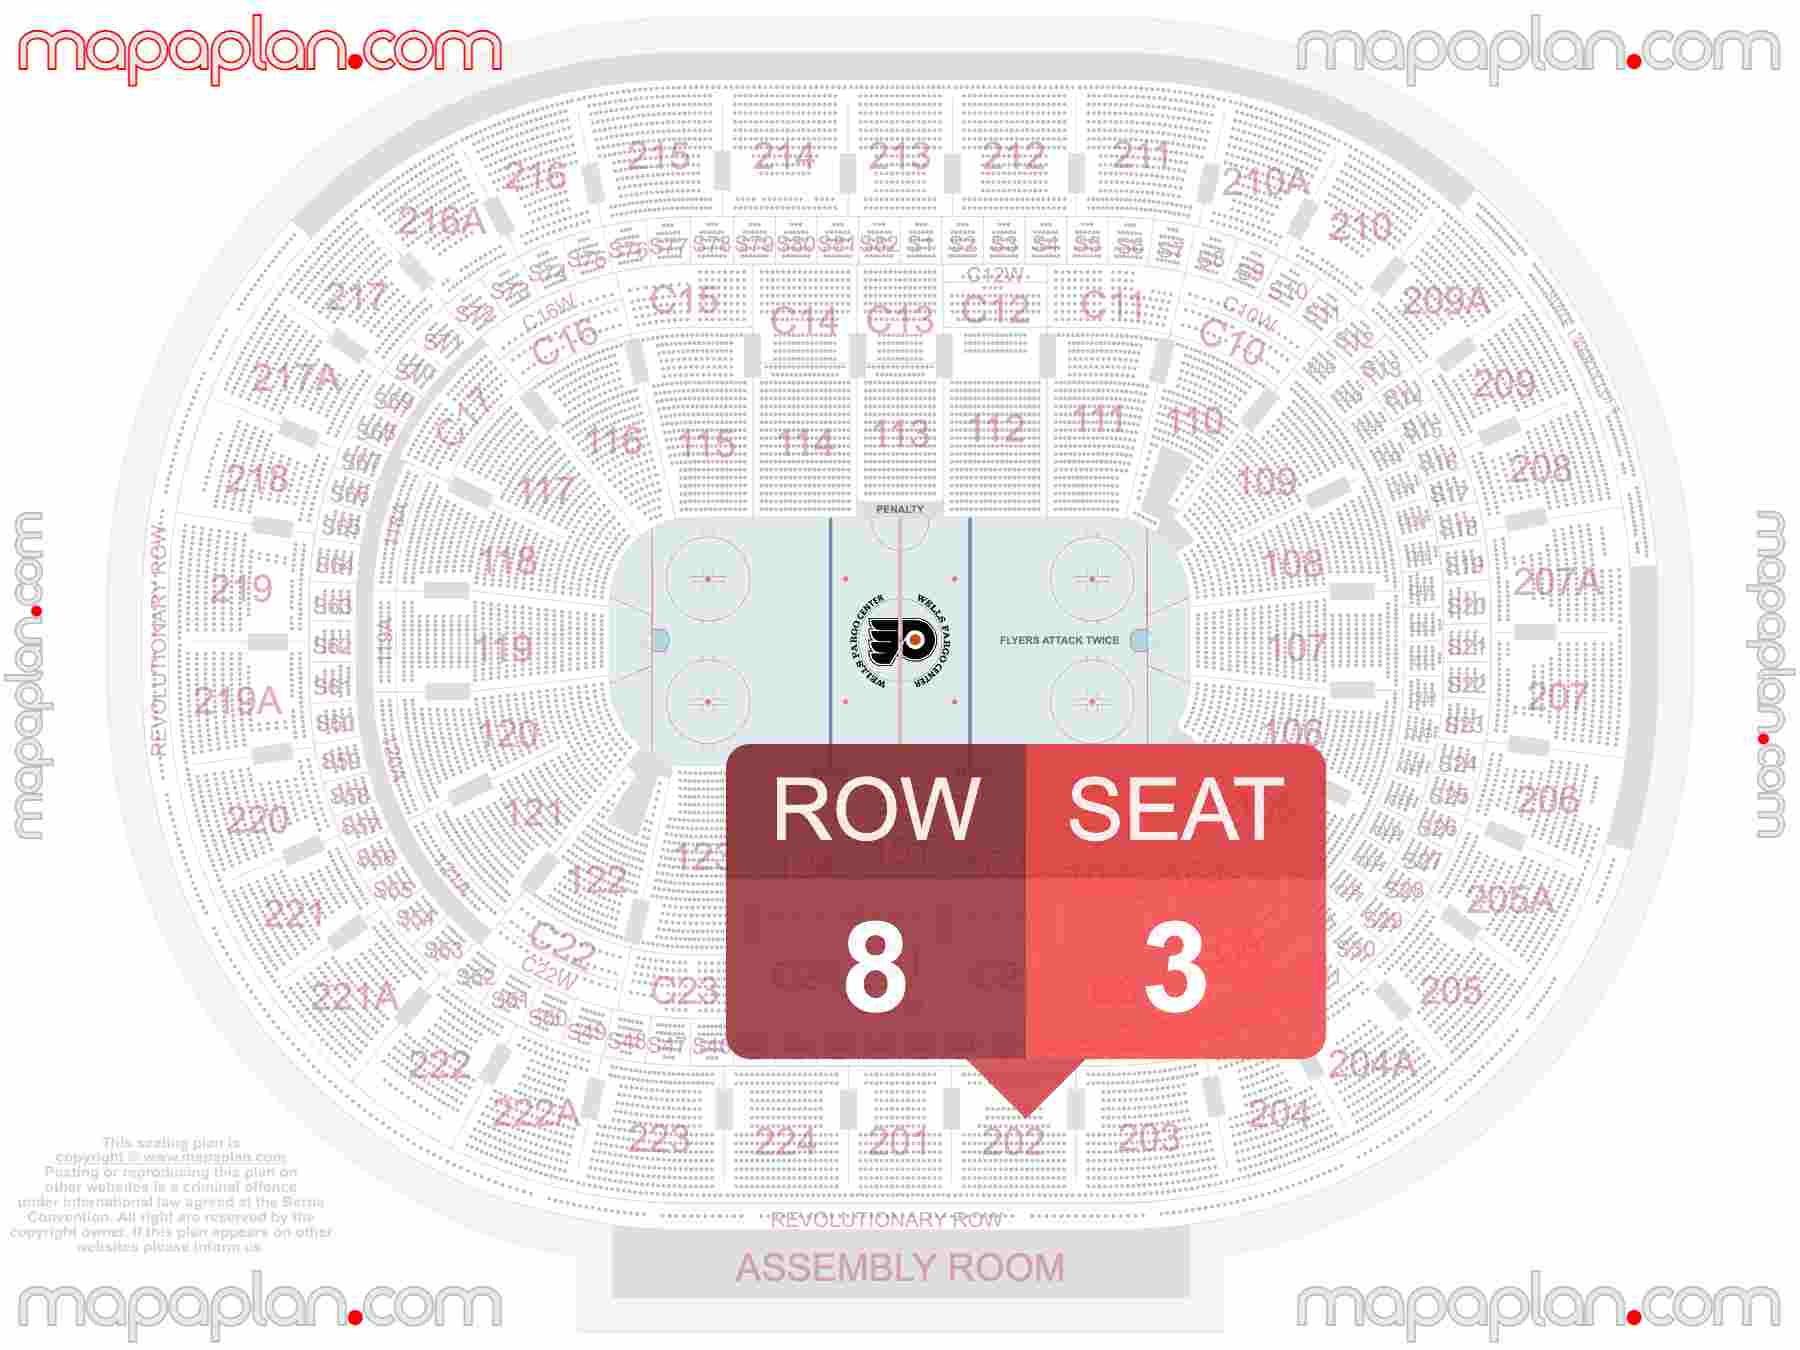 Philadelphia Wells Fargo Center seating chart Philadelphia Flyers NHL hockey find best seats row numbering system plan showing how many seats per row - Individual 'find my seat' virtual locator